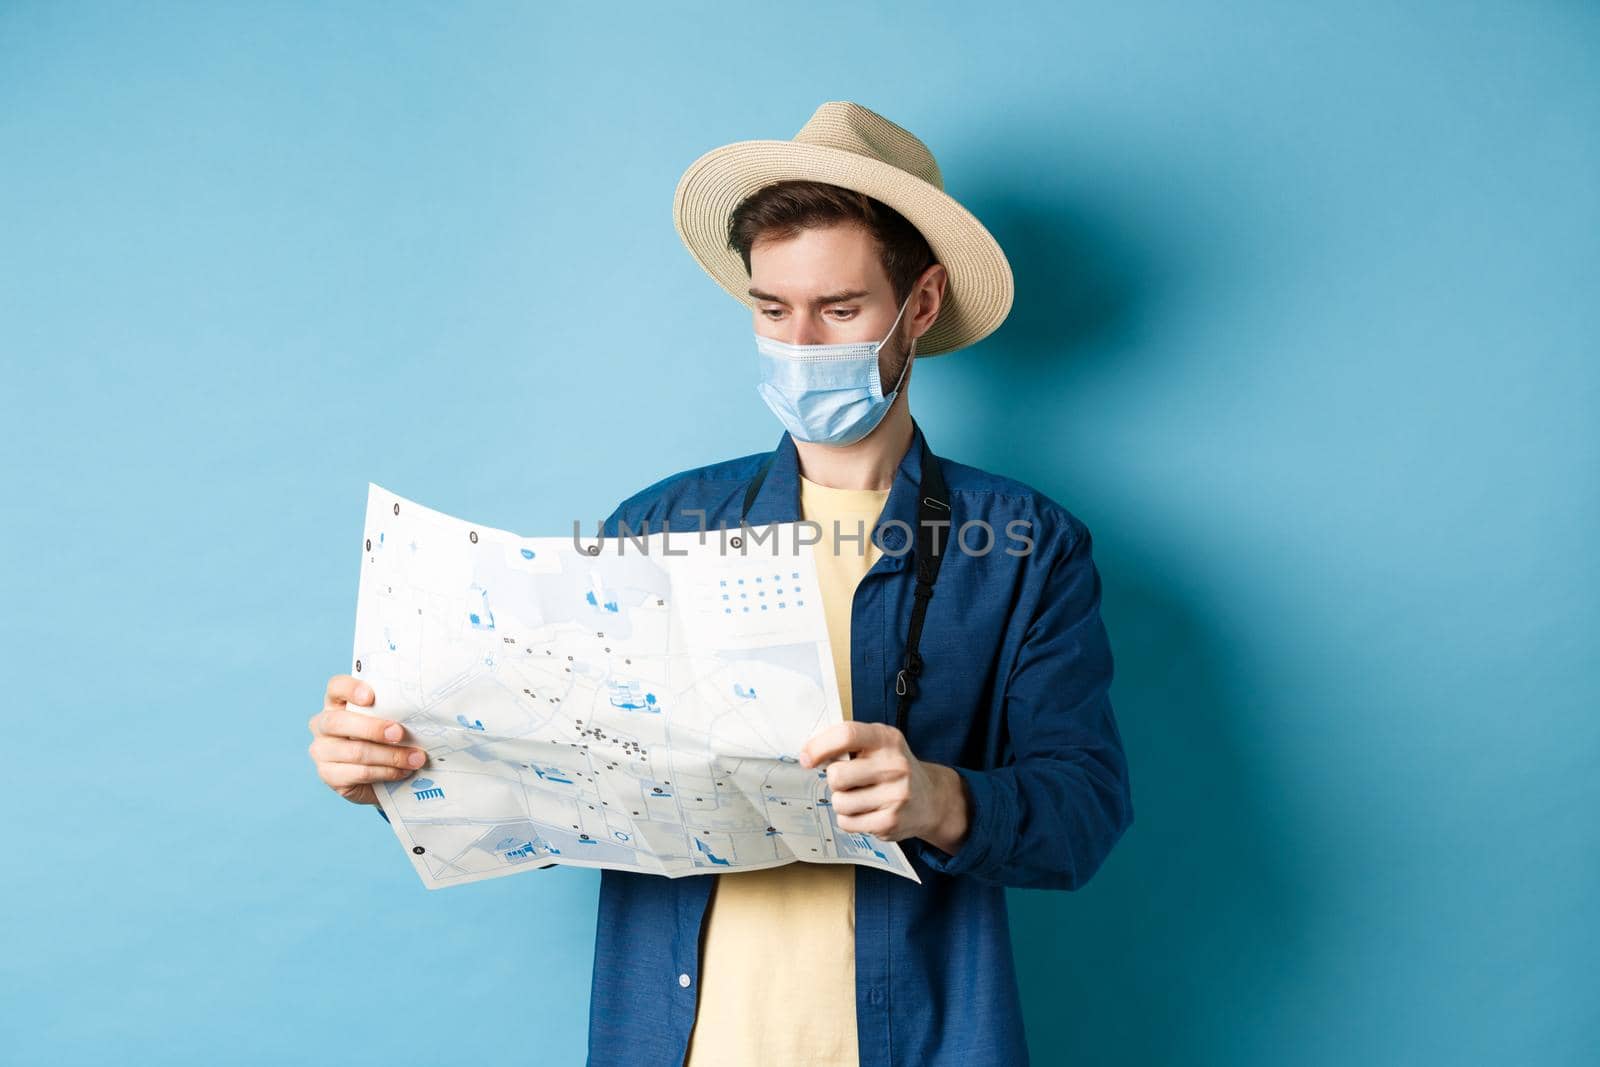 Covid-19, pandemic and travel concept. Tourist looking at map with sightseeing on vacation, wearing summer hat and medical mask from coronavirus, blue background.